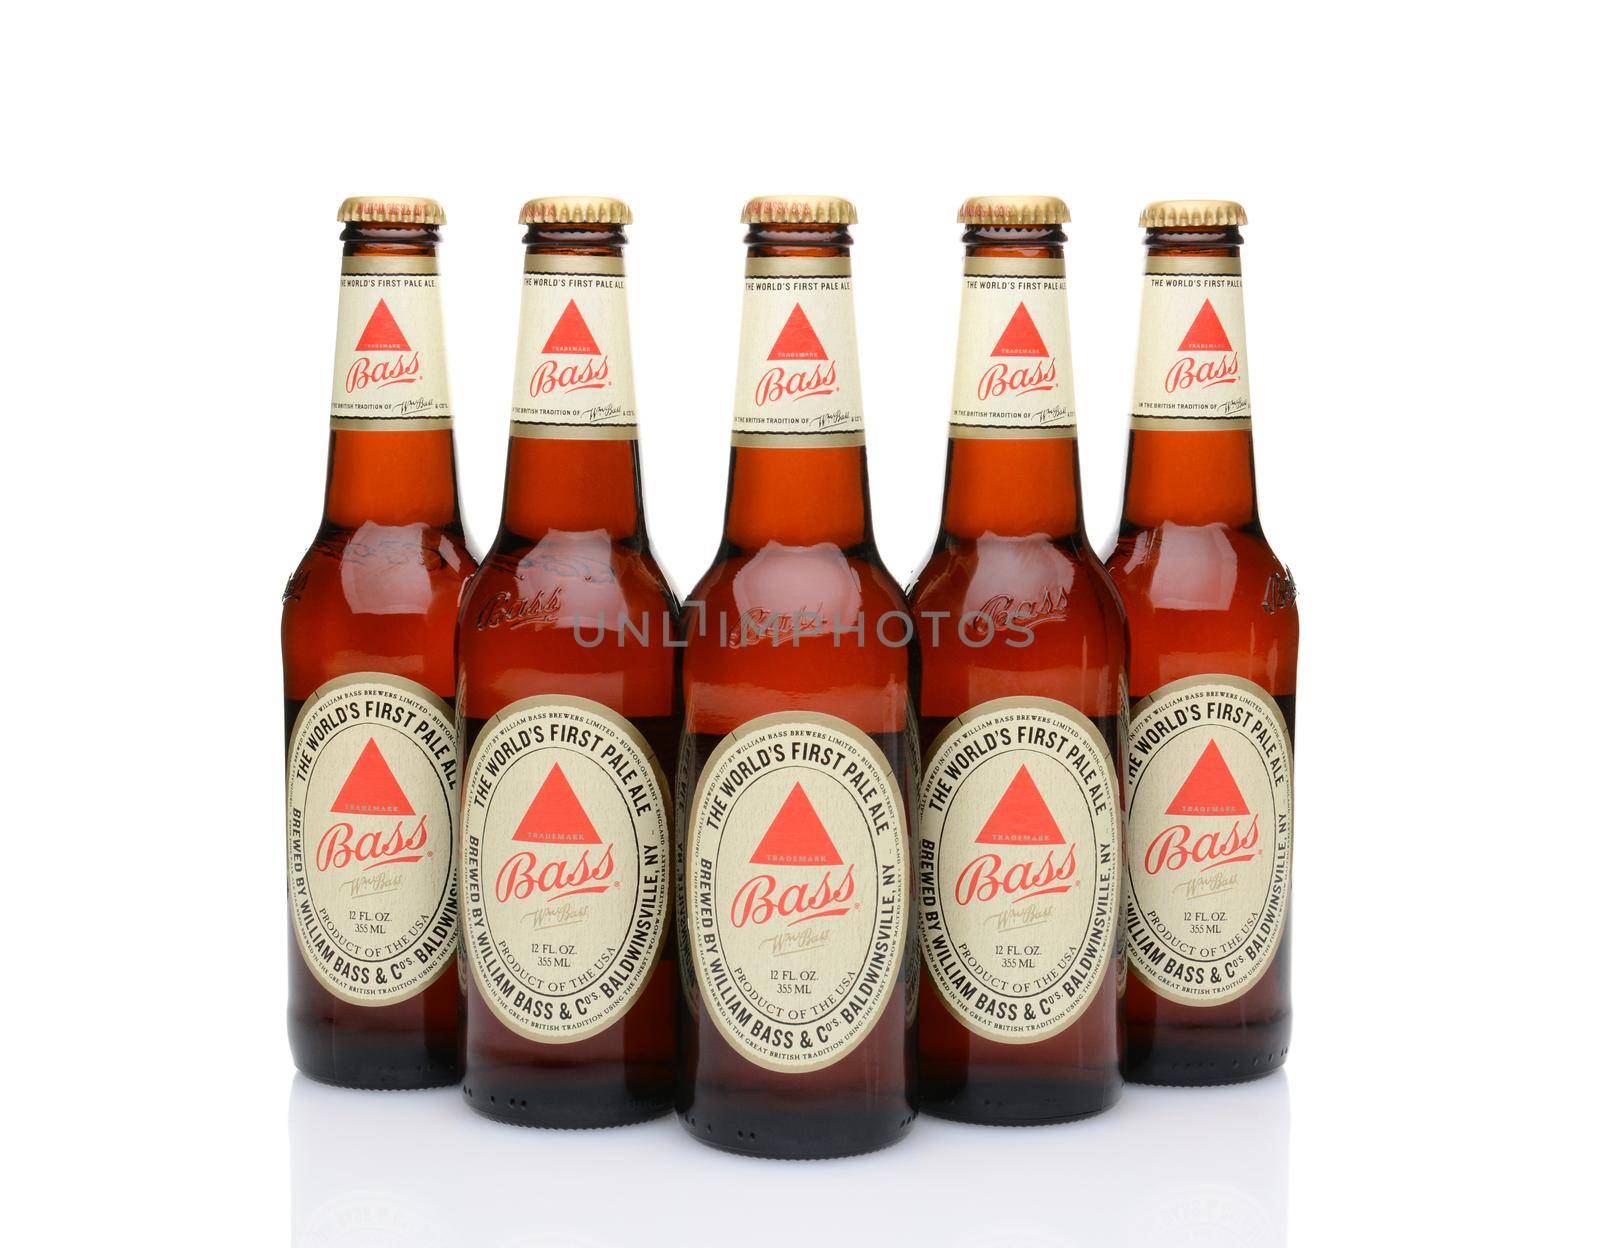 IRVINE, CA - MAY 25, 2014: Five bottles of Bass Ale on white. The Bass Brewery was founded in 1777 by William Bass, in Trent, England is now owned by Anheuser-Busch InBev.